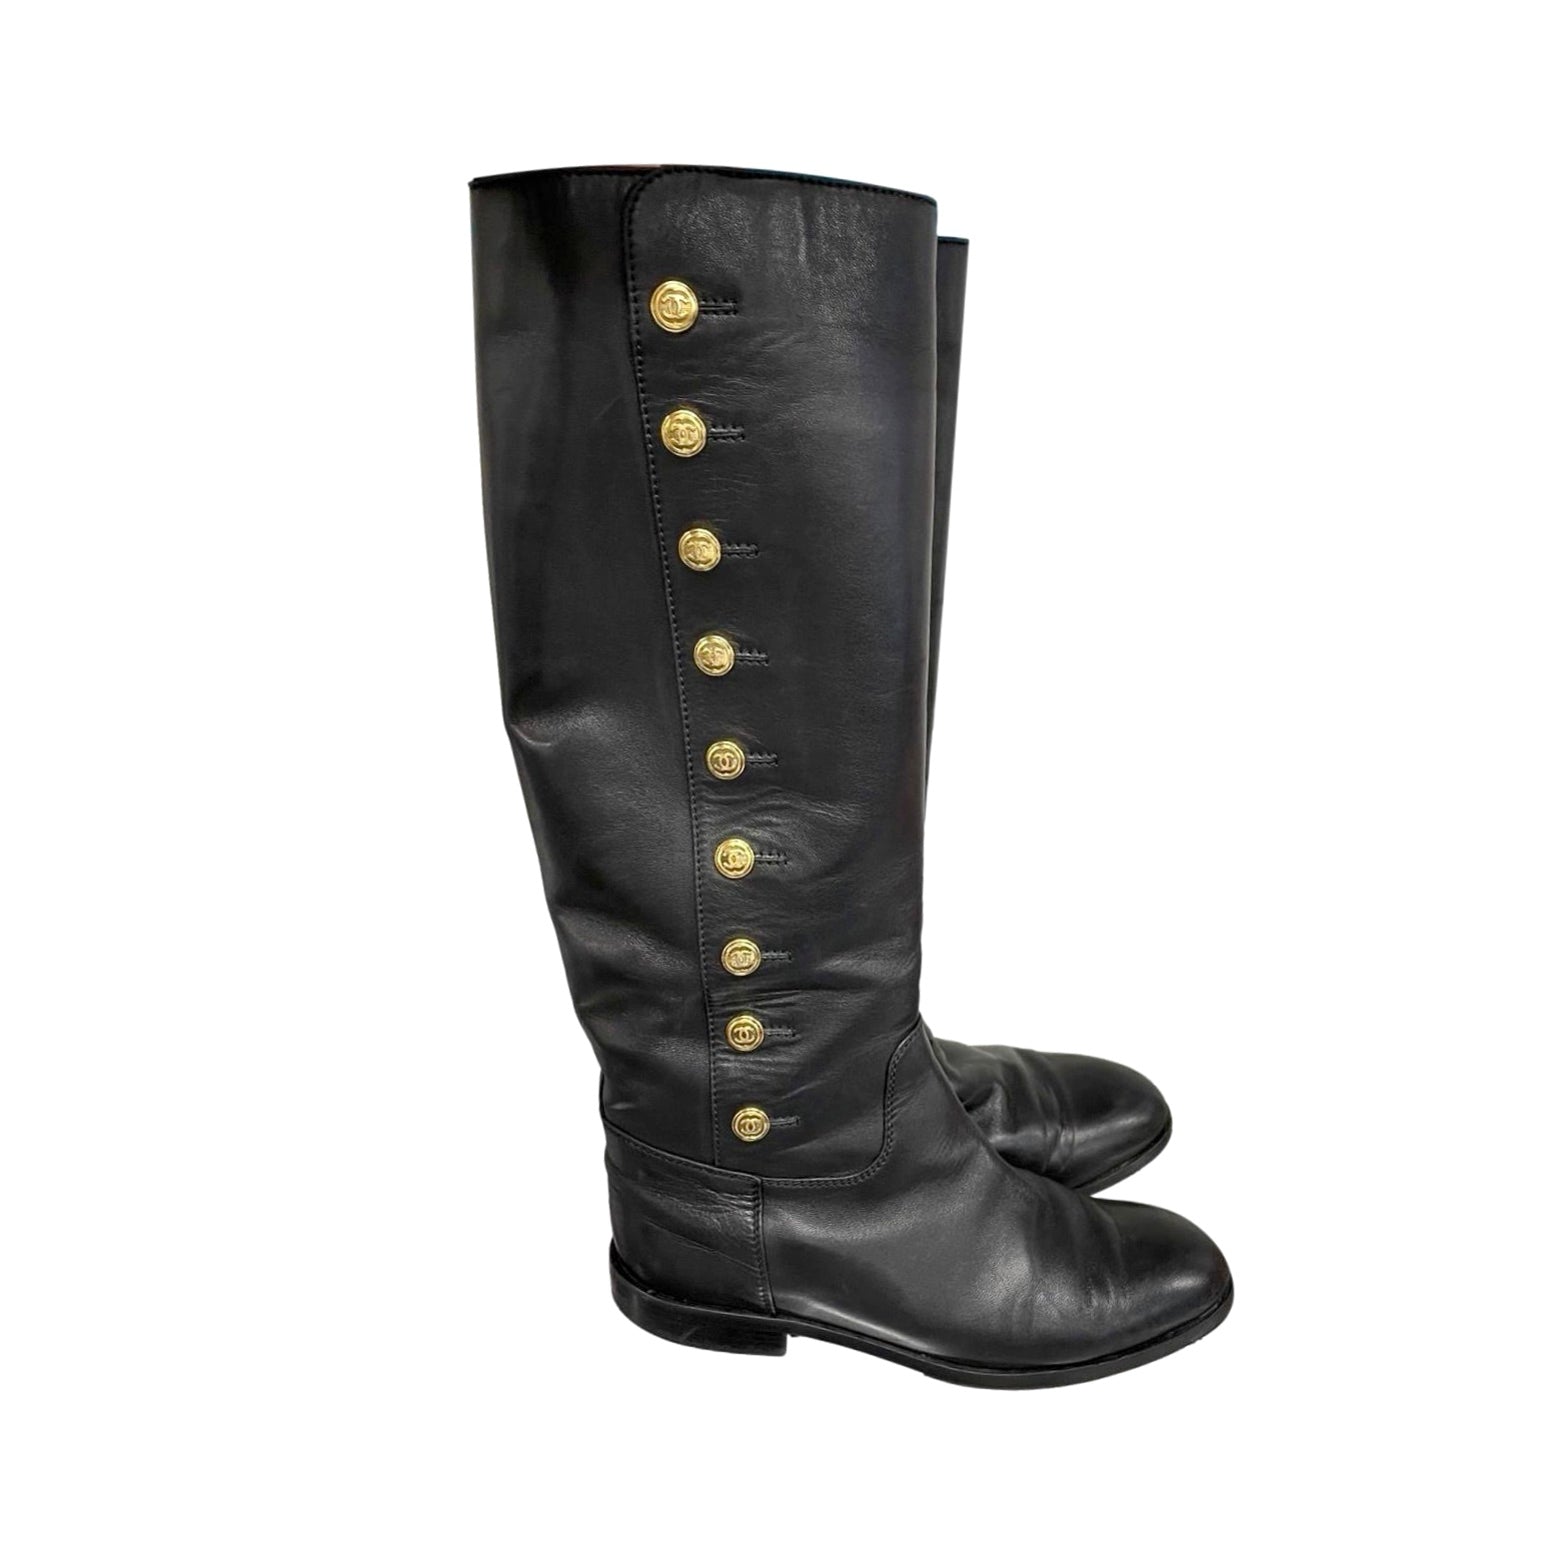 Chanel riding boots in black leather